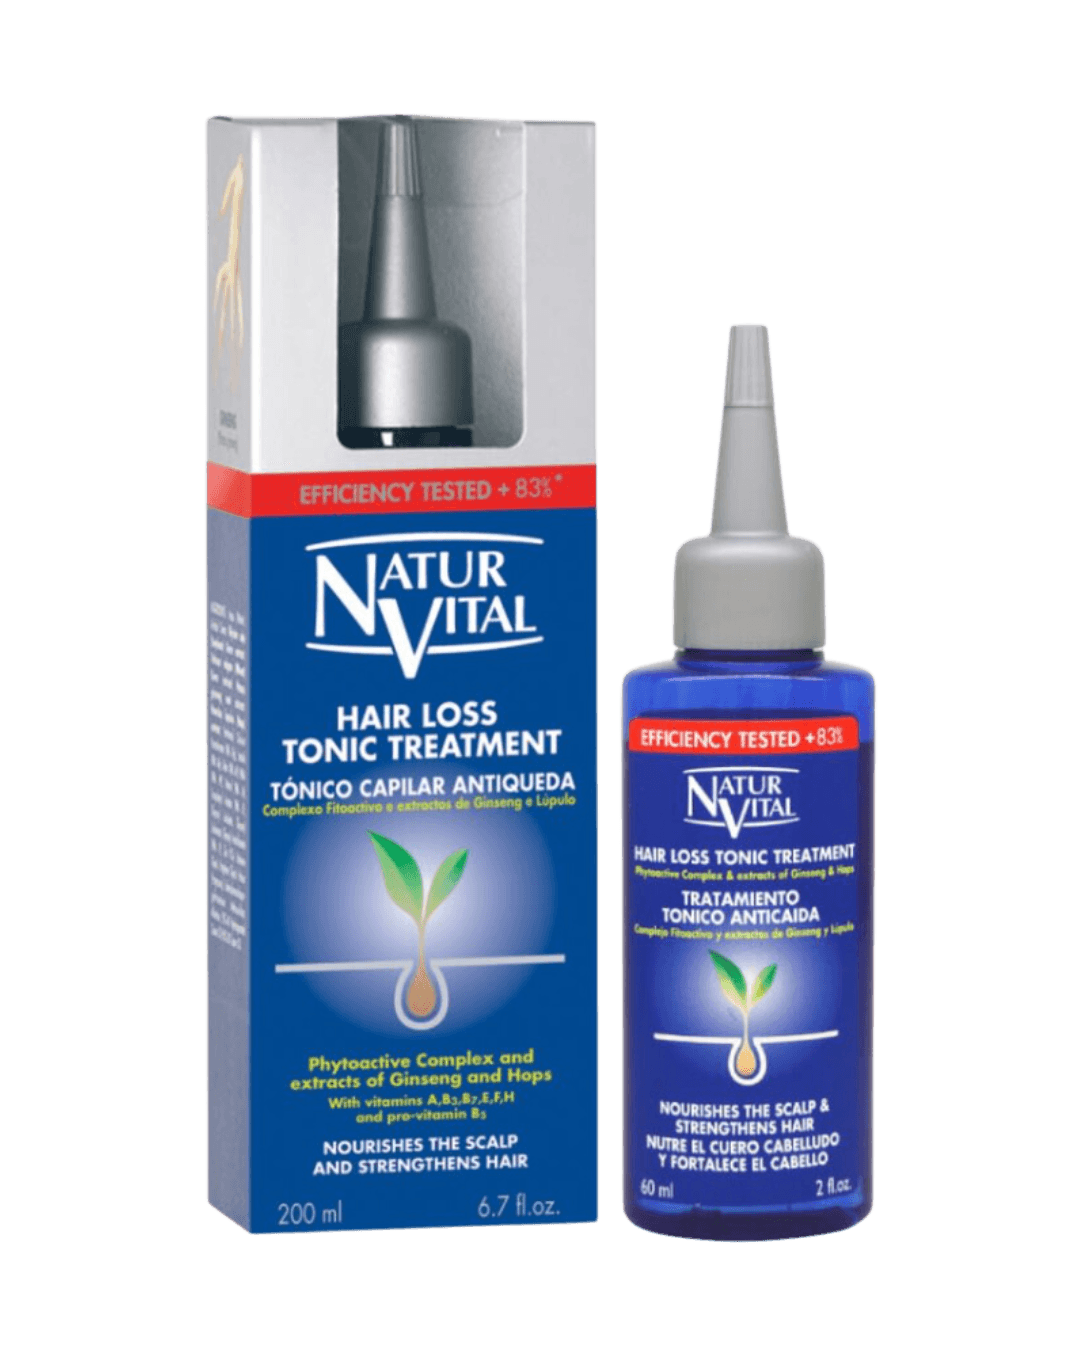 Daily Vanity Beauty Awards 2024 Best  Naturvital Hair Loss Tonic Treatment Voted By Beauty Experts